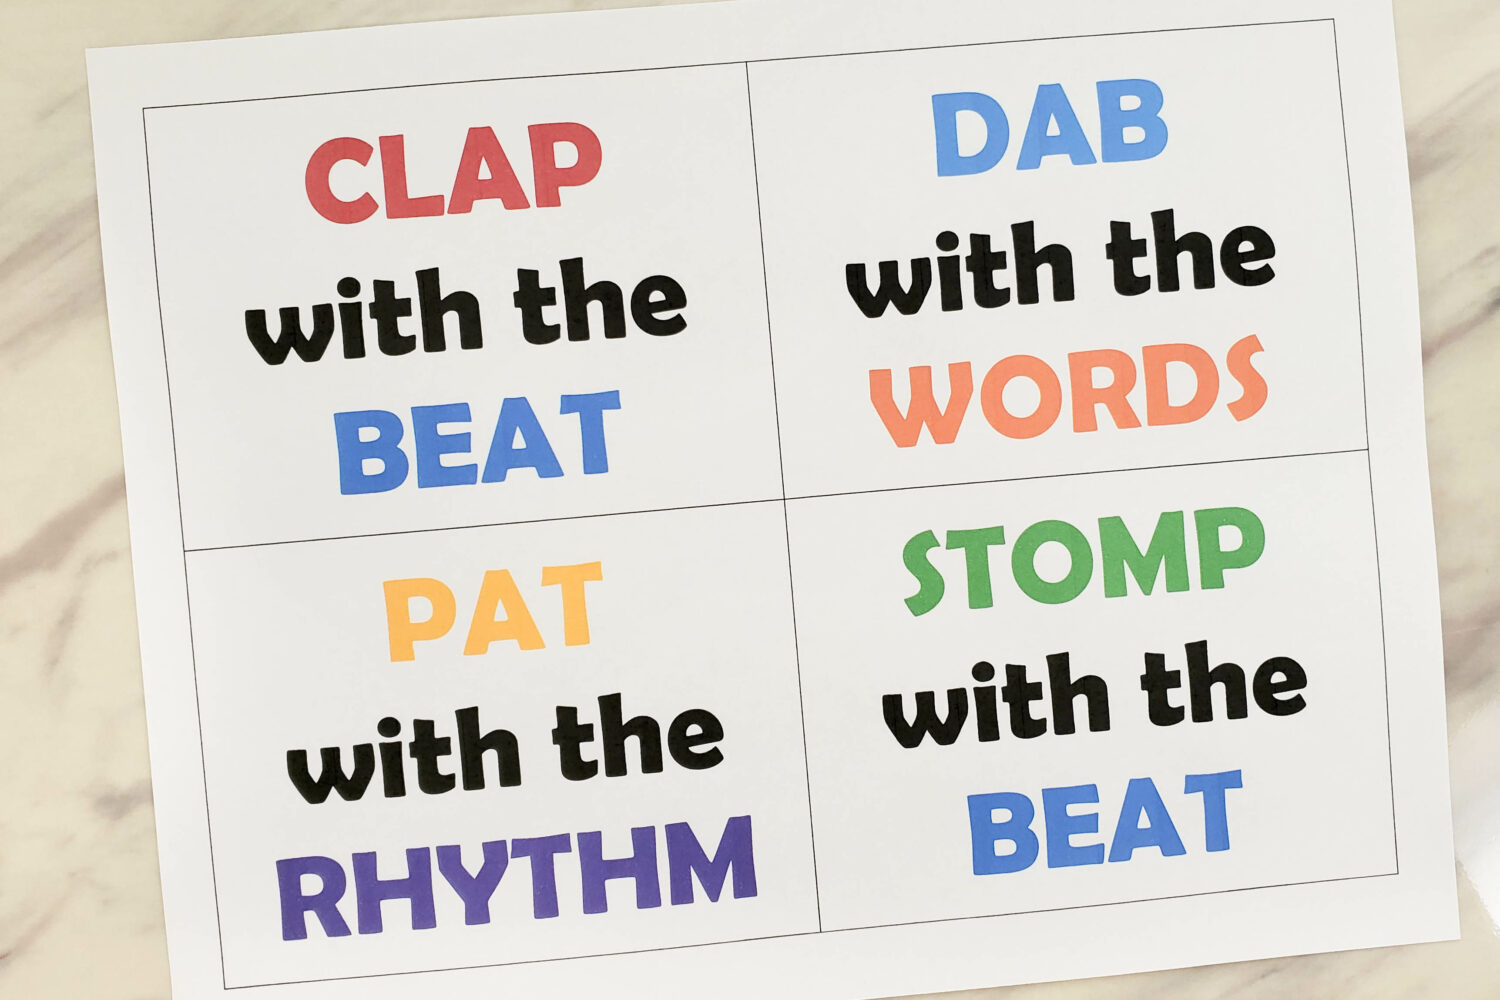 We'll Bring the World His Truth Beat vs Rhythm singing time activity - learn how the beat and the rhythm differ with this fun activity with several ways to interact and try out the different methods. Don't forget to grab the printable song helps for LDS Primary music leaders!